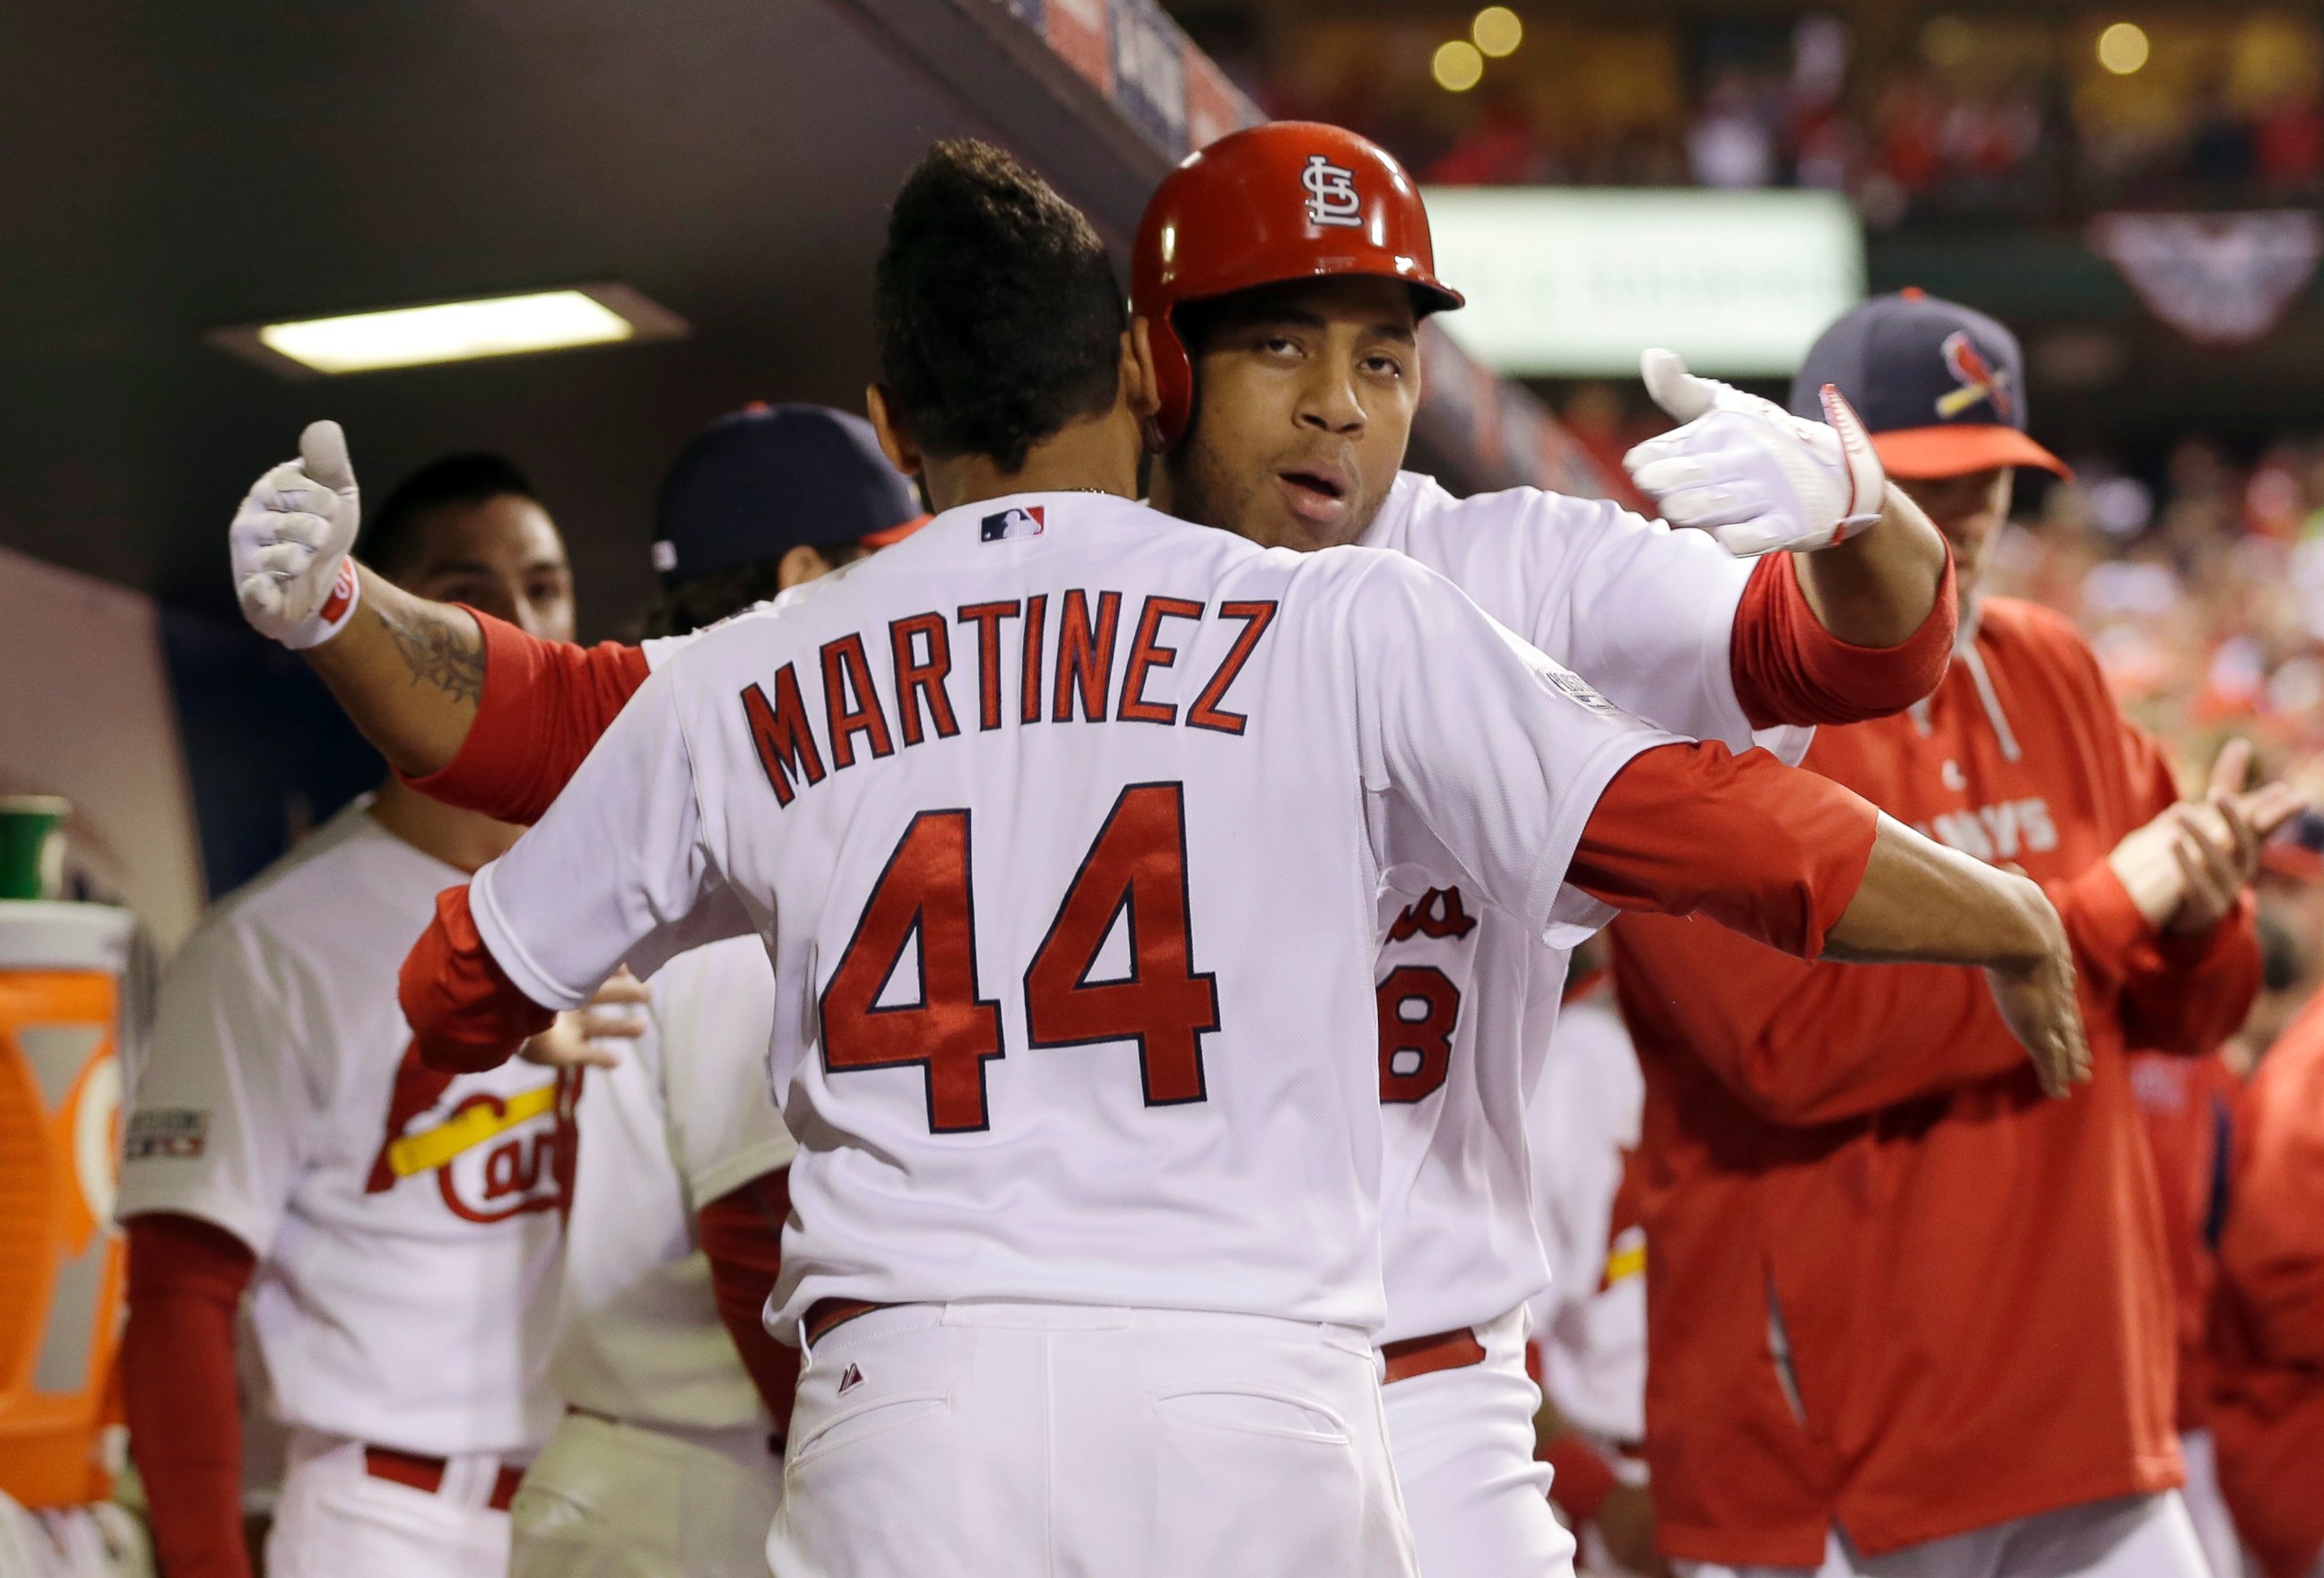 St. Louis Cardinals' Oscar Taveras is congratulated by Carlos Martinez (44) after hitting a home run during the seventh inning in Game 2 of the National League baseball championship series against the San Francisco Giants Sunday, Oct. 12, 2014.